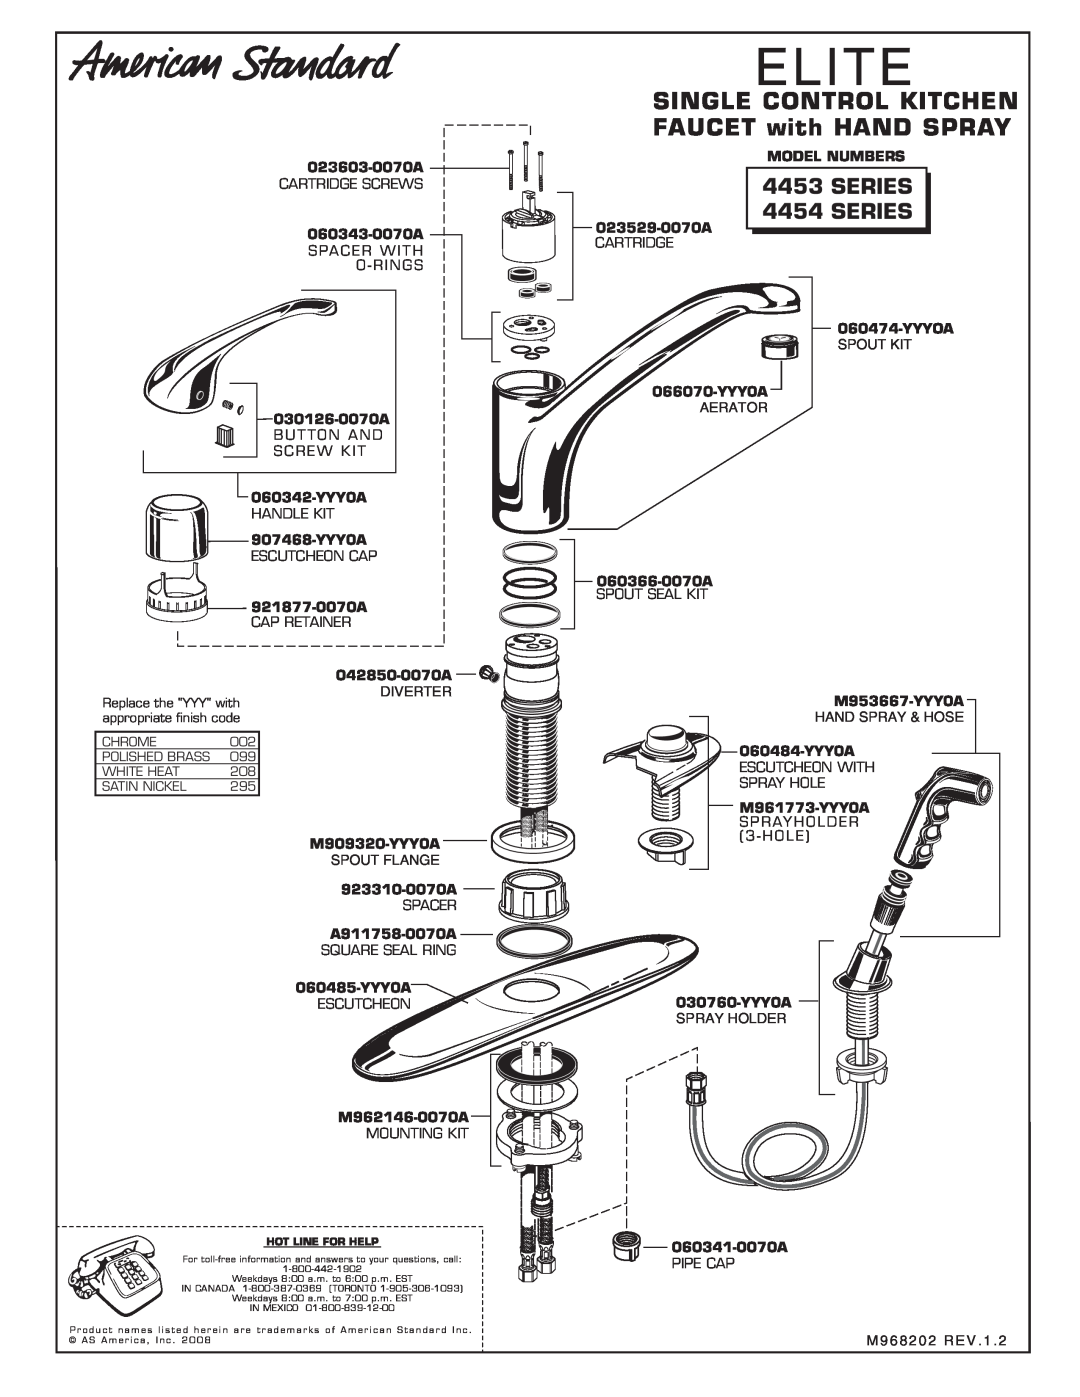 American Standard 4453 installation instructions SINGLE CONTROL KITCHEN FAUCET with HAND SPRAY, Elite, SERIES 4454 SERIES 